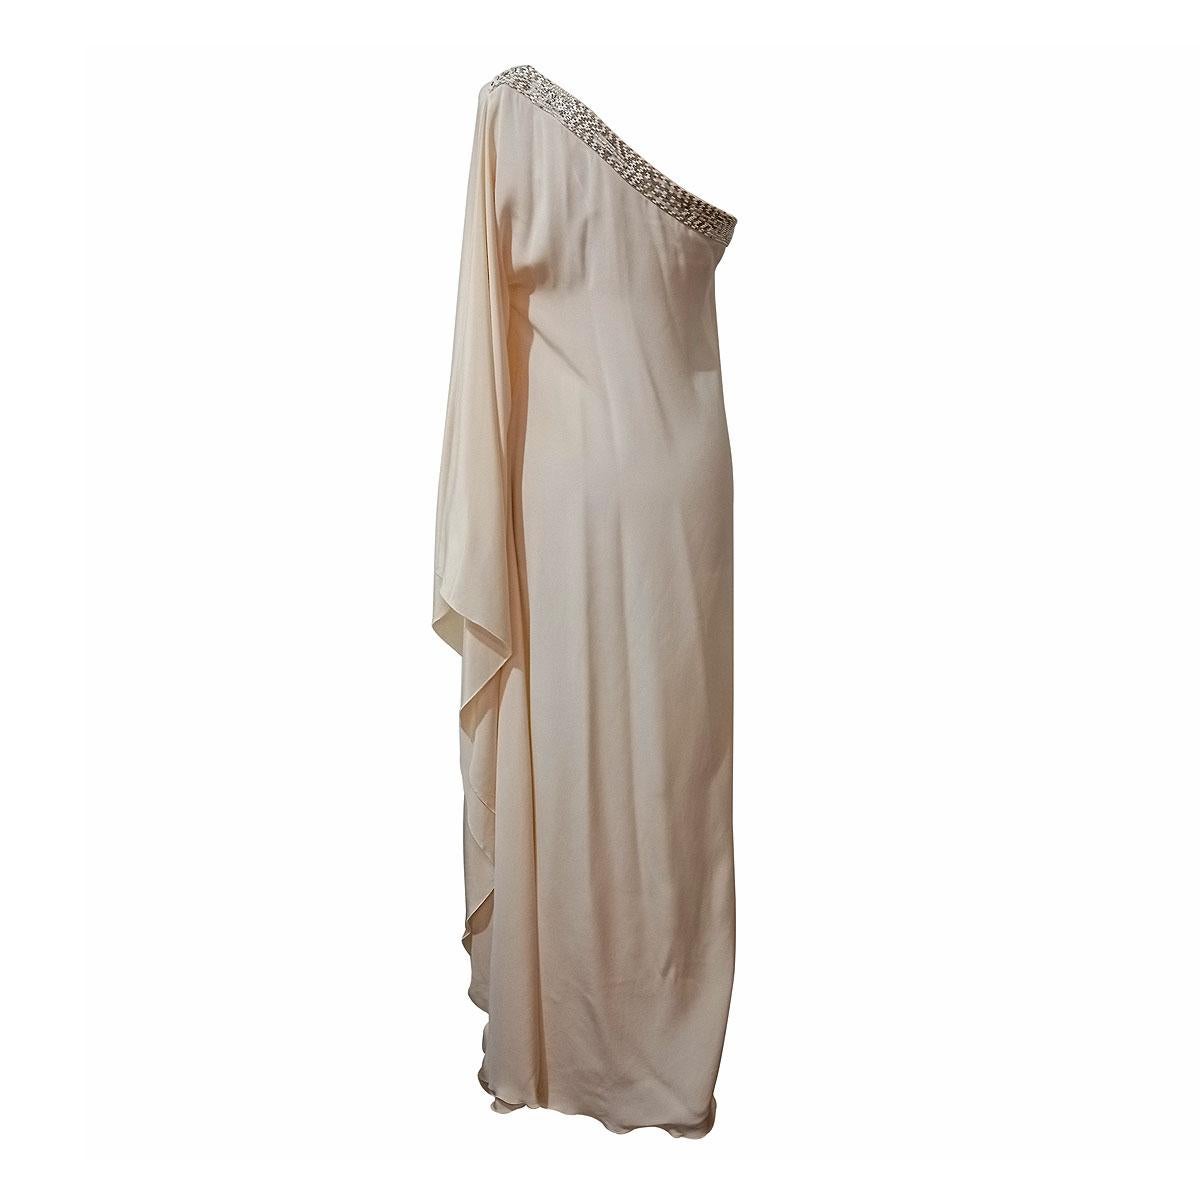 Beautiful long dress by Emilio Pucci
Long dress
Silk
Ivory color
Beautiful sequins embellishment
One shoulder
Maximum length cm 145 
Worldwide express shipping included in the price !